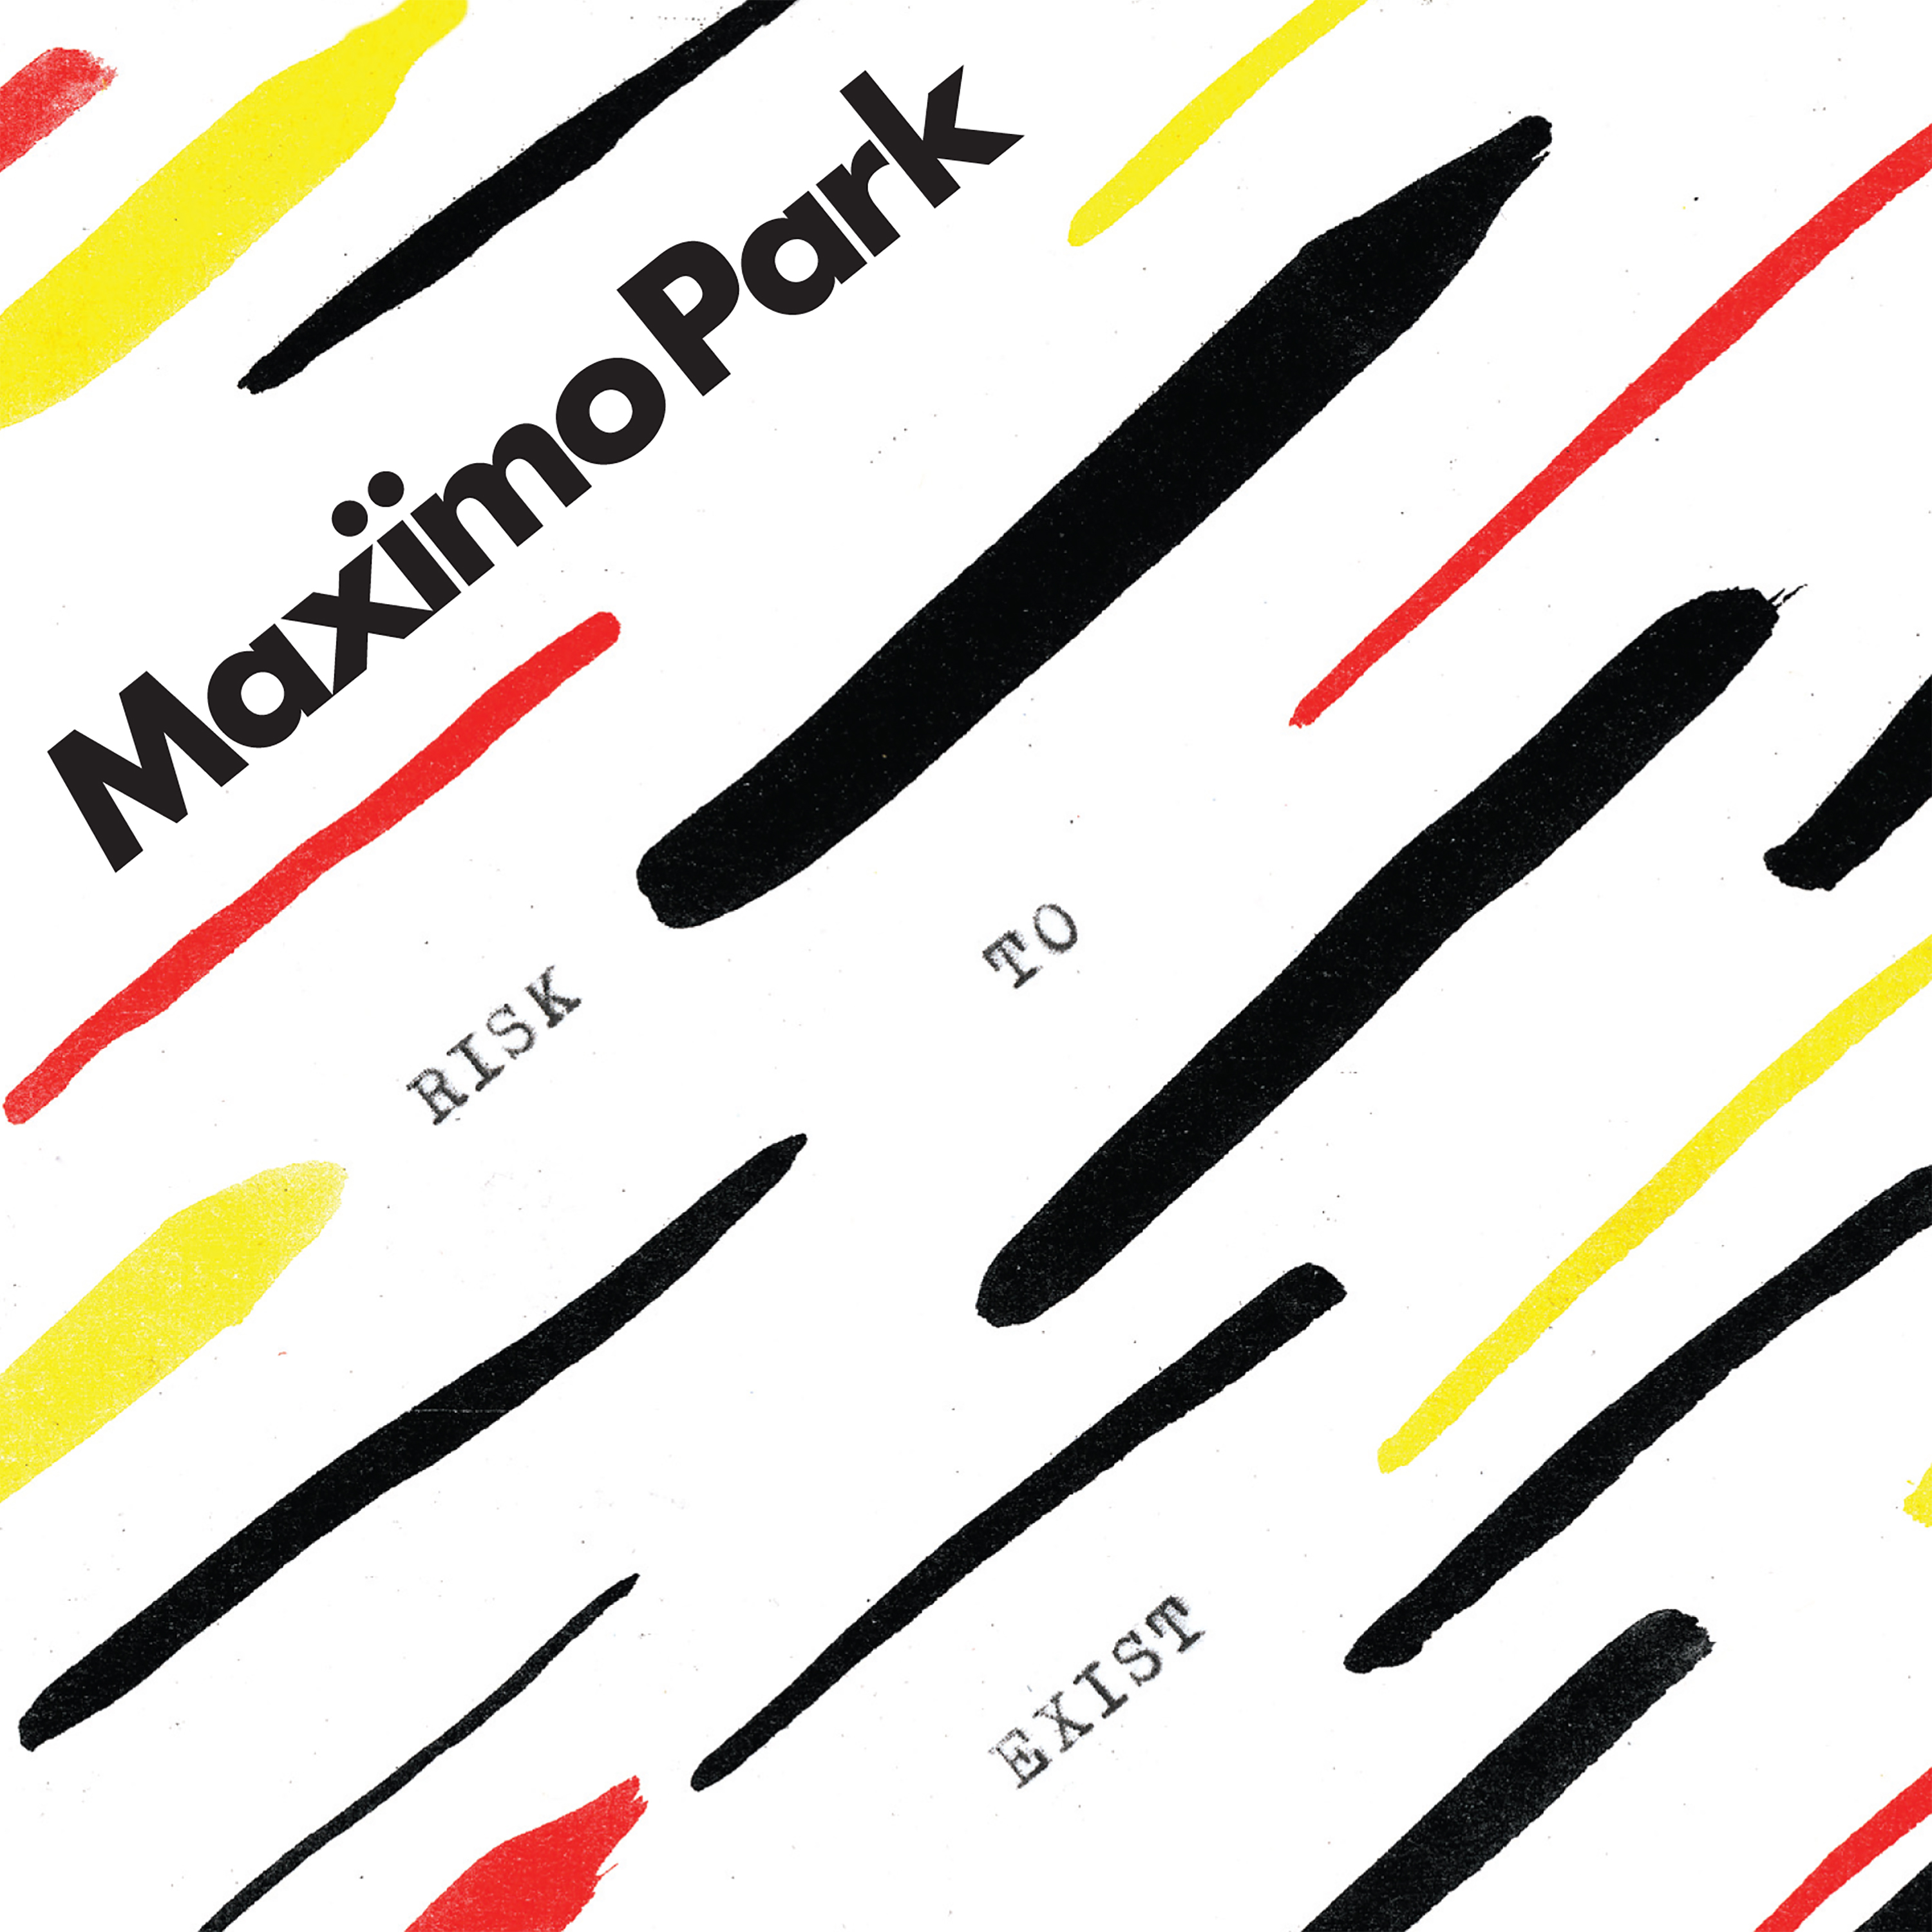 Maximo Park - Risk To Exist (Deluxe version) - 2xCD